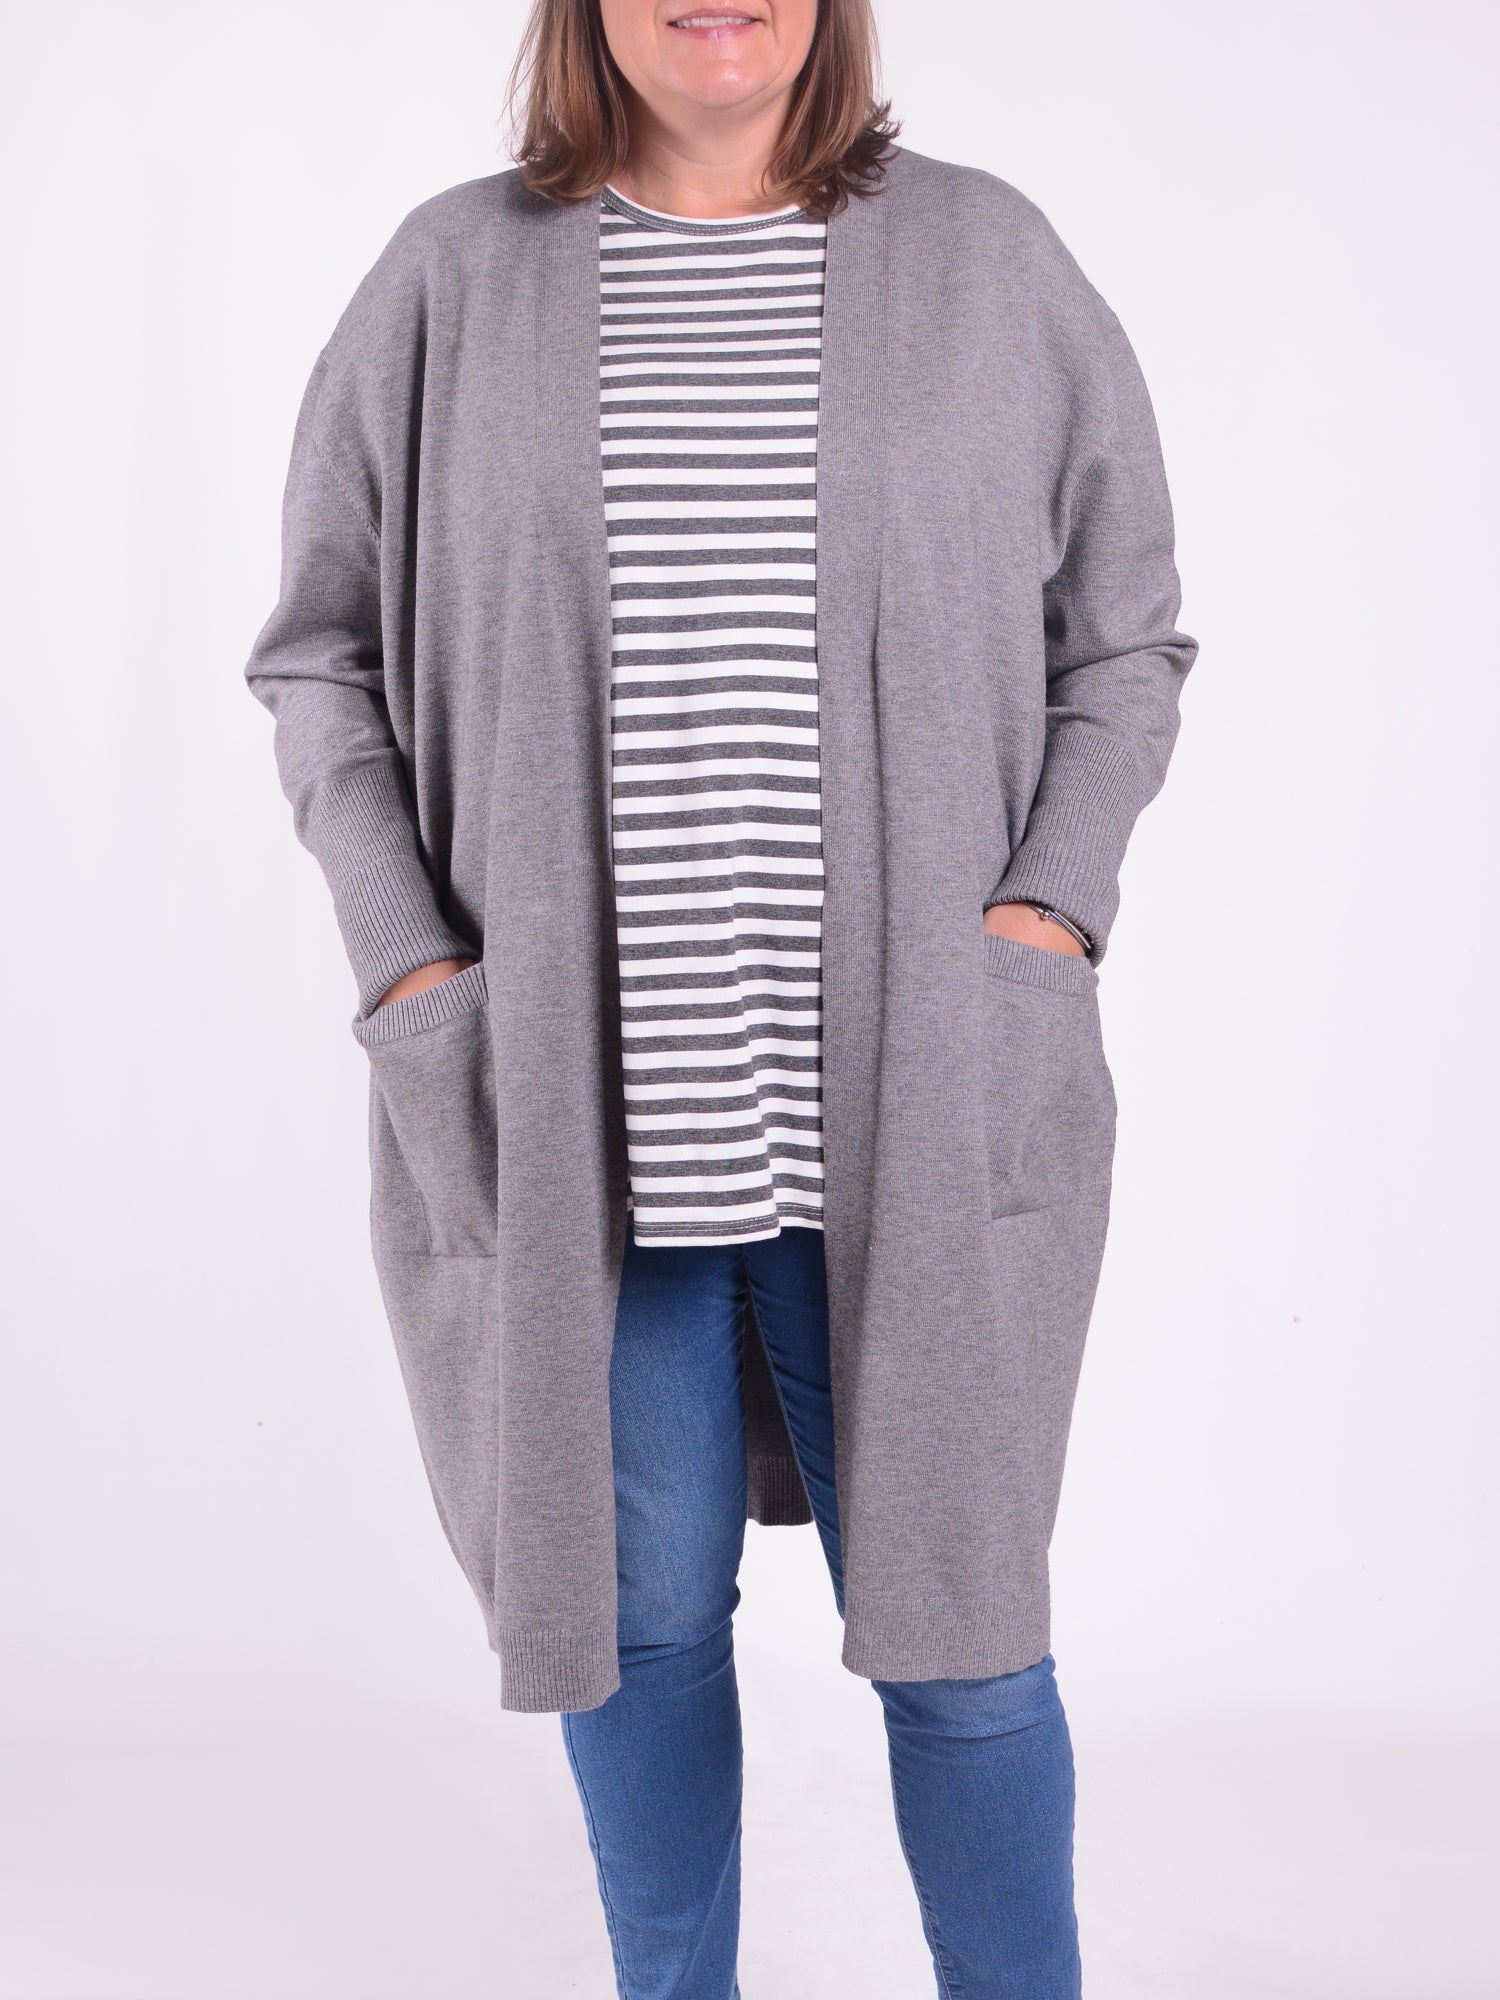 Soft Knit Longline Cardigan - CT1, Jumpers & Cardigans, Pure Plus Clothing, Lagenlook Clothing, Plus Size Fashion, Over 50 Fashion